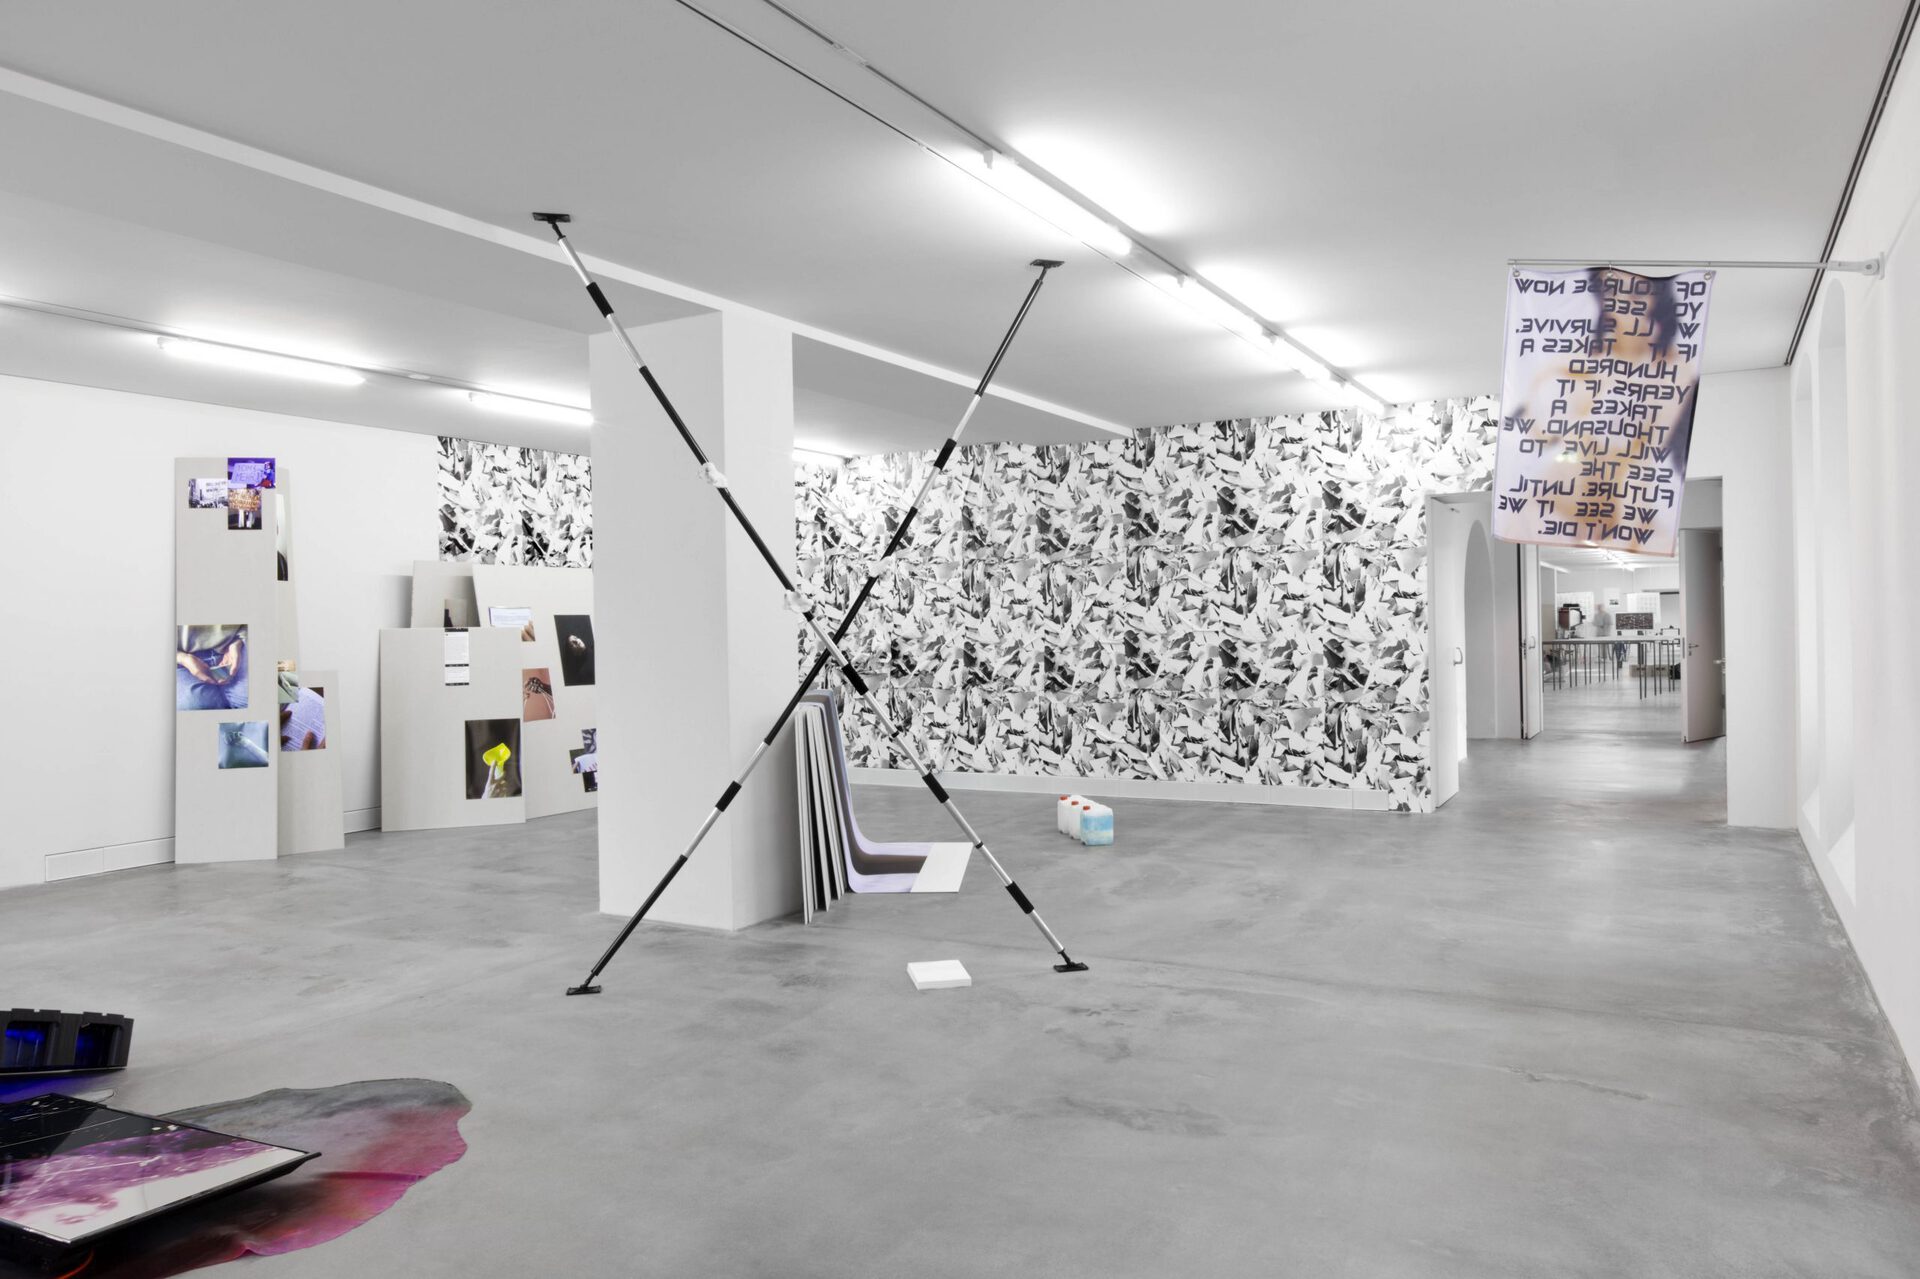 Law of Life, 2020, exhibition view, ZAK - Center for Contemporary Art, Berlin